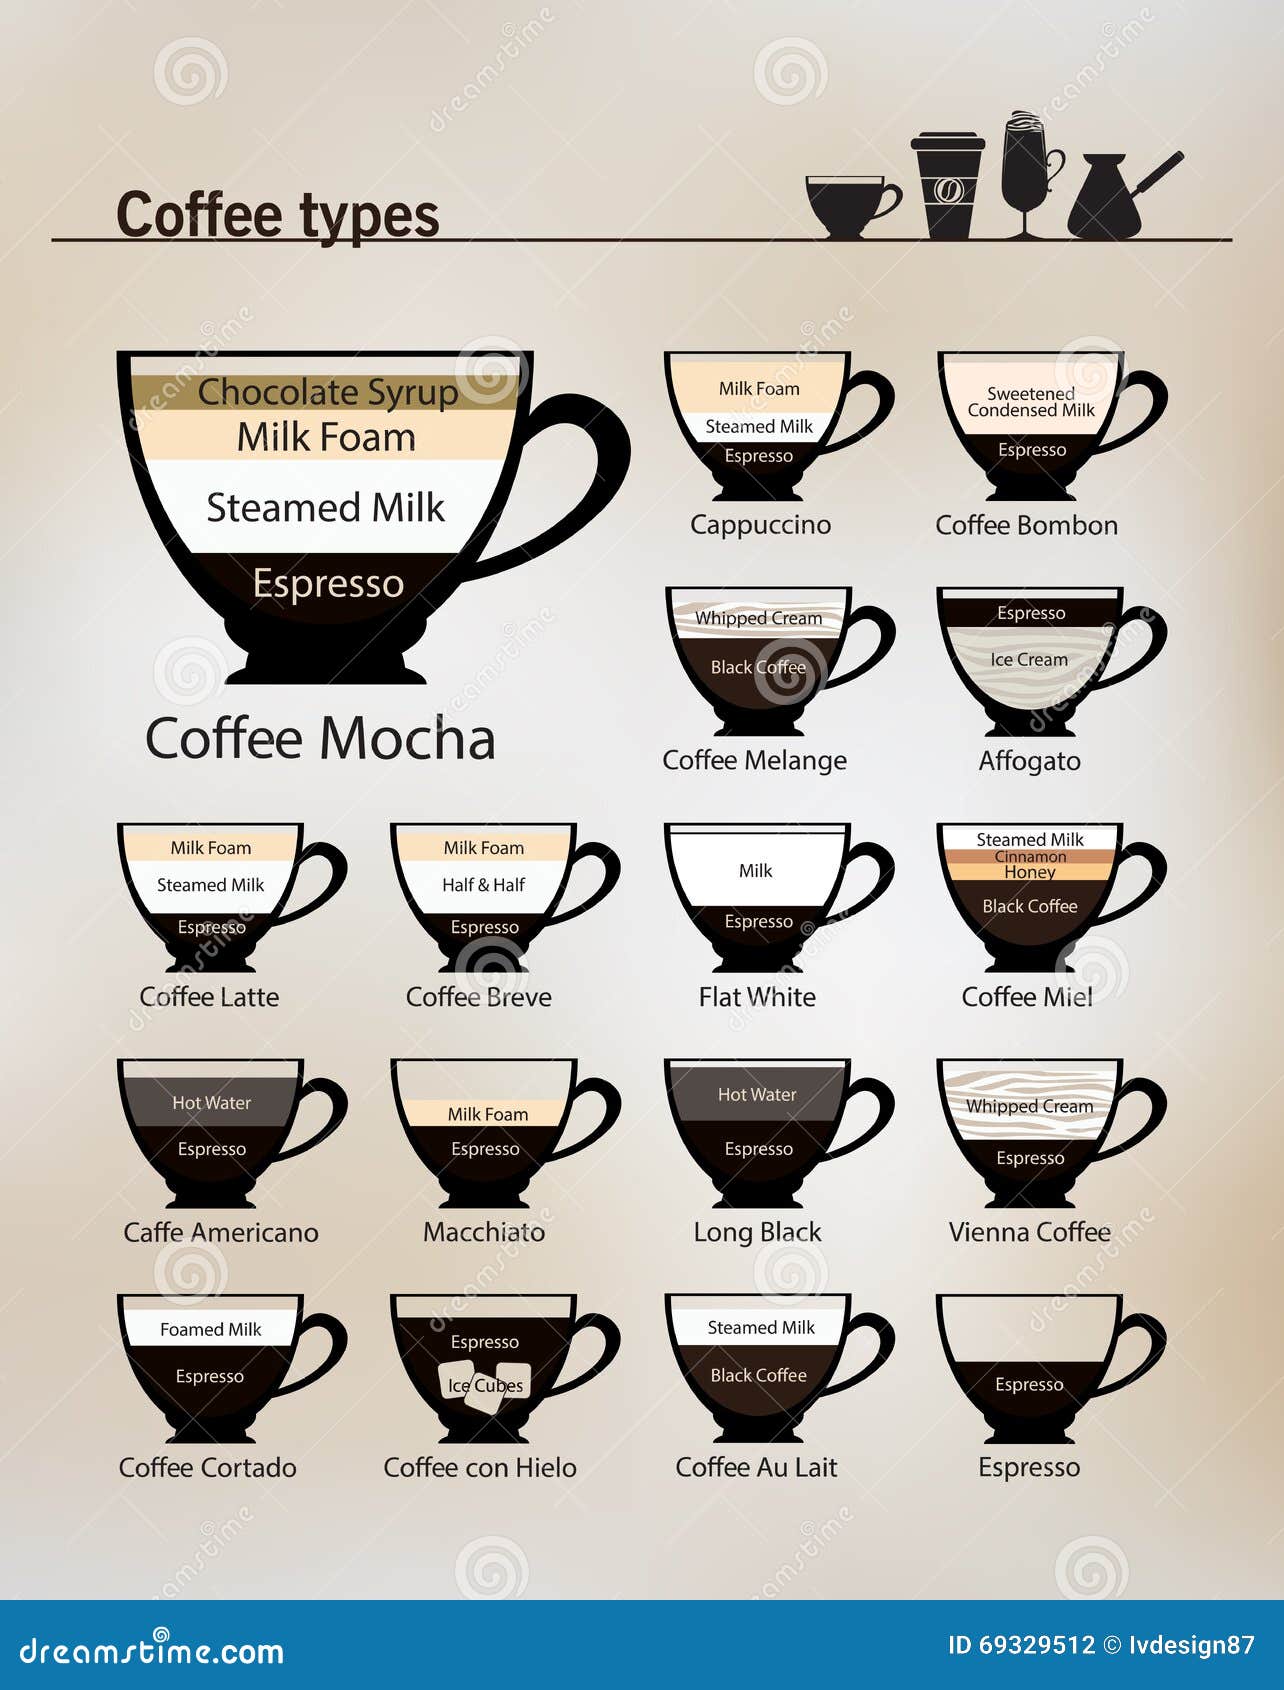 recipes for the most popular types of coffee and their preparation